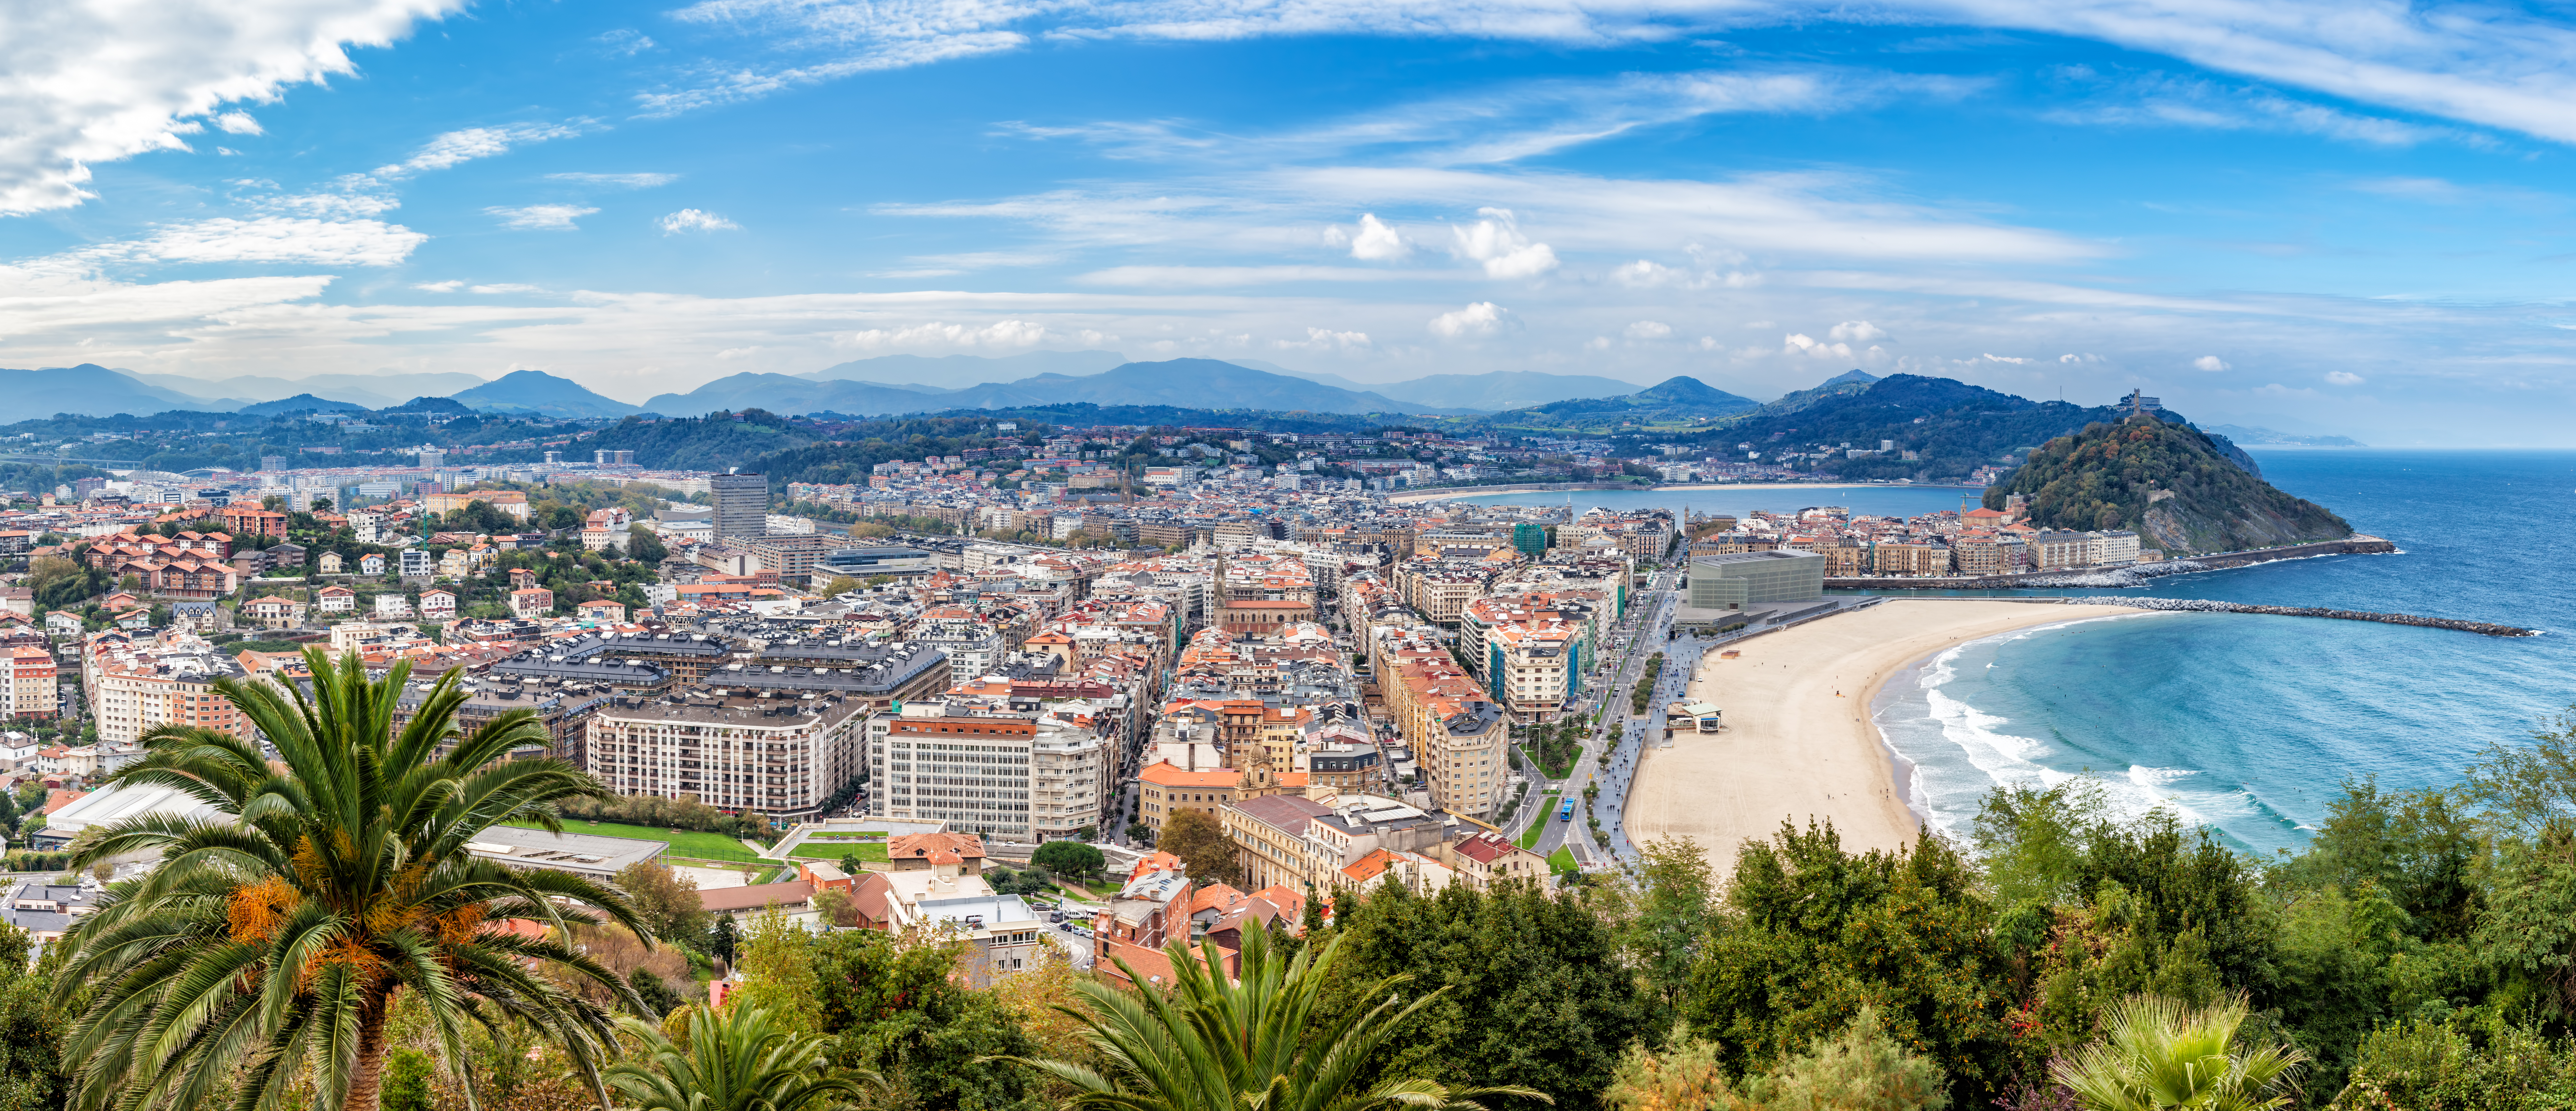 San Sebastian lies on the coast of the Bay of Biscay. Photo / Getty Images